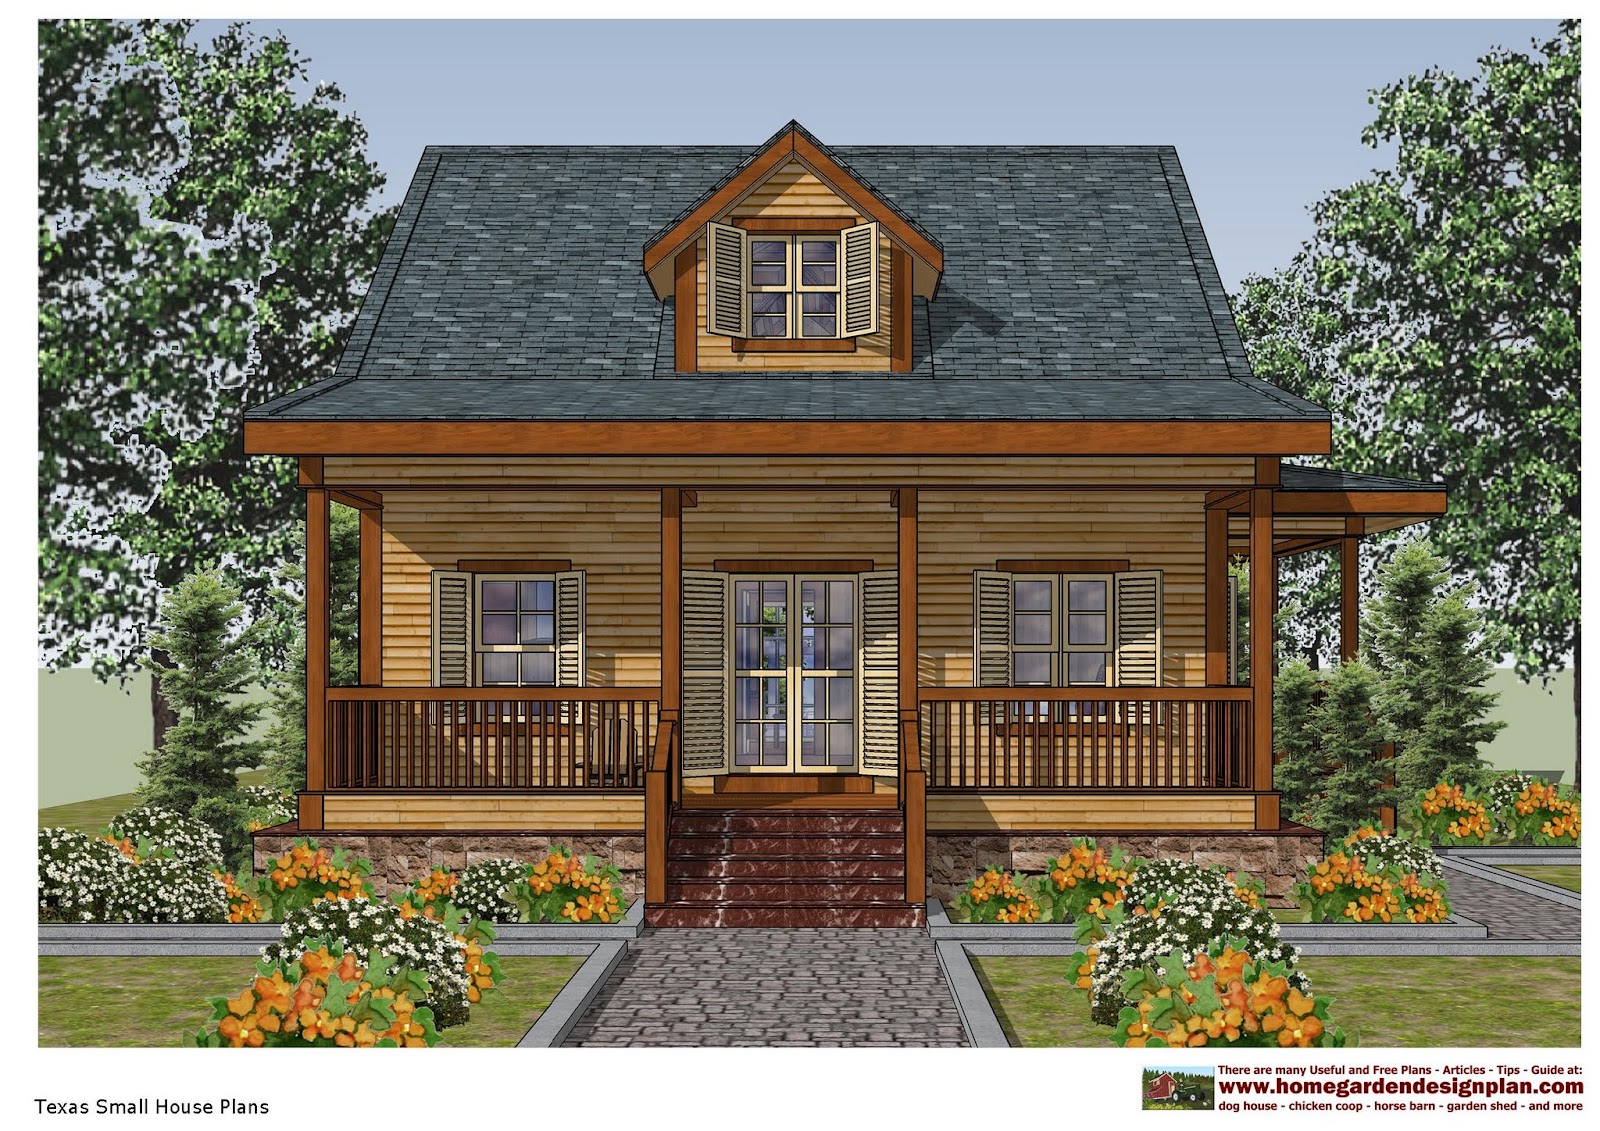  home  garden  plans  SH100 Small  House  Plans  Small  House  